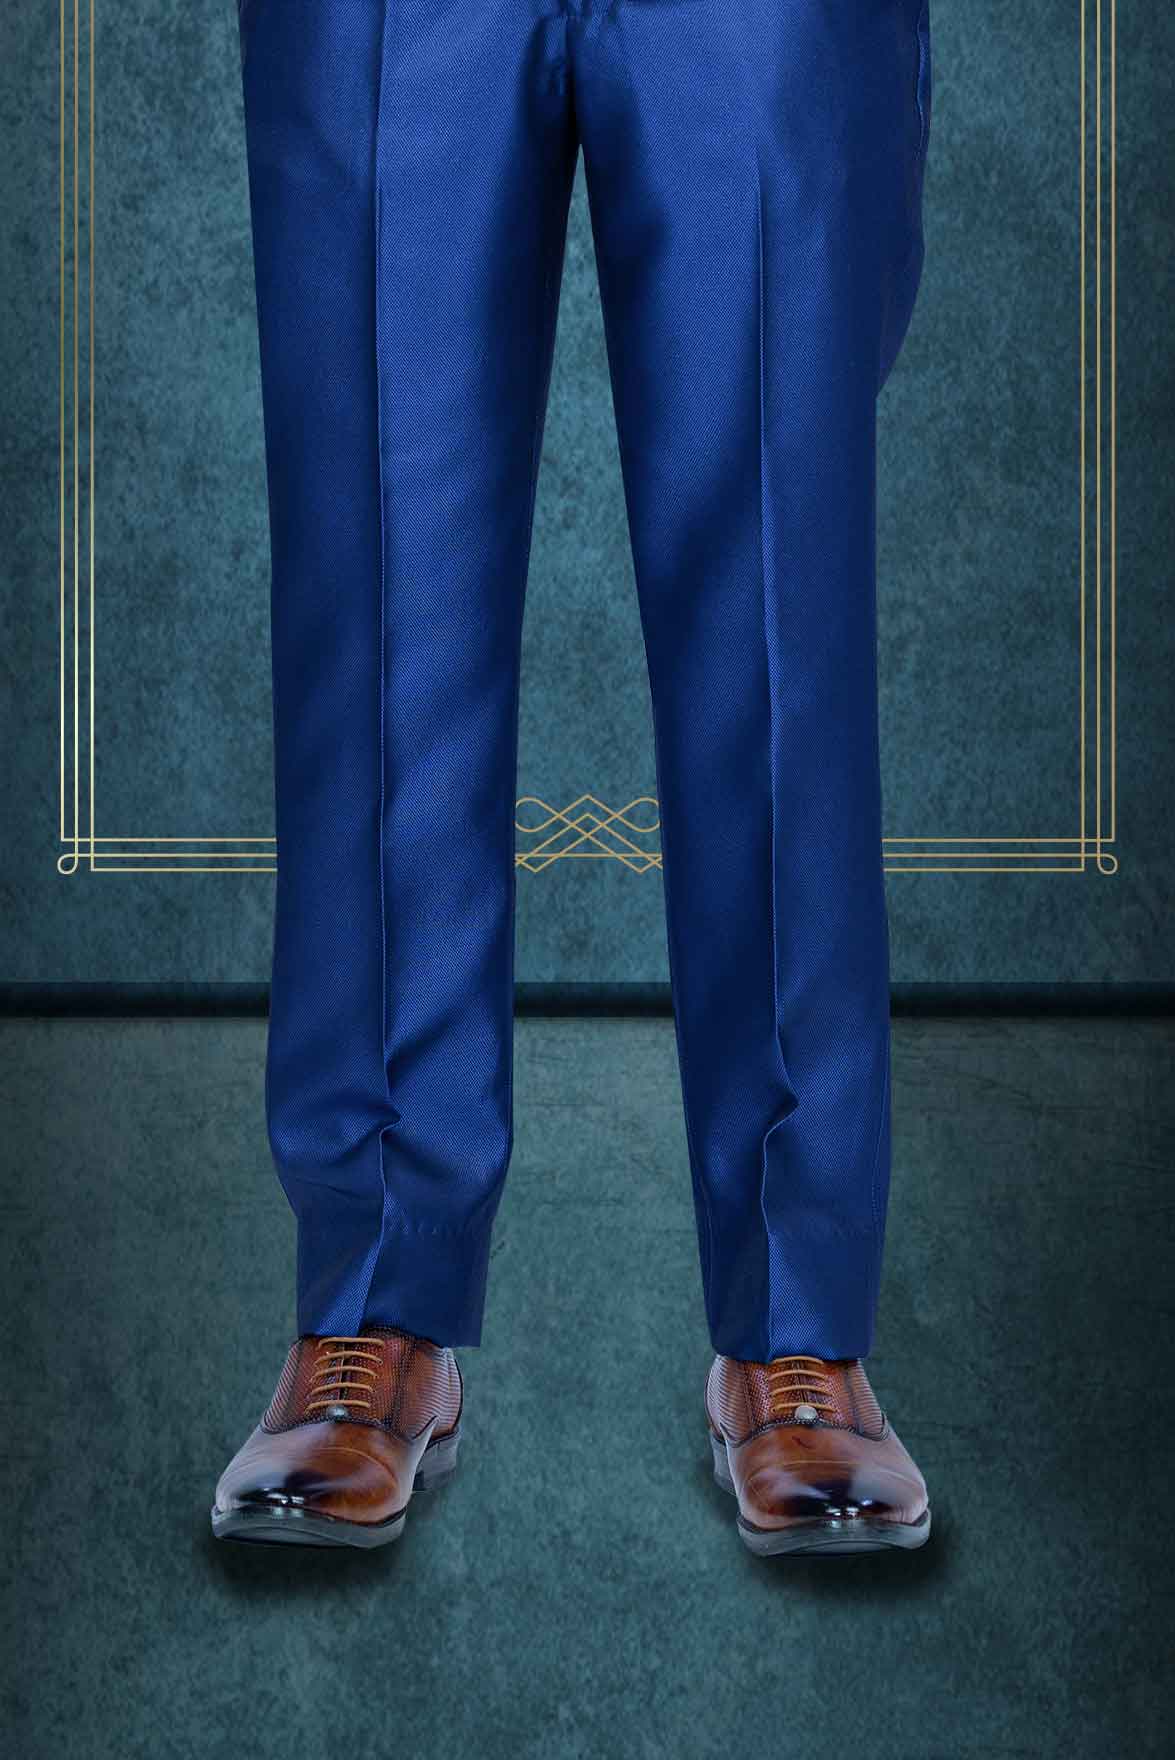 ROYAL BLUE - IMPORETD TERRY RAYON SOFT FINISH PANT/TROUSER UNSTICHED FABRIC  at Rs 400/piece, Trouser Cloth in Bengaluru